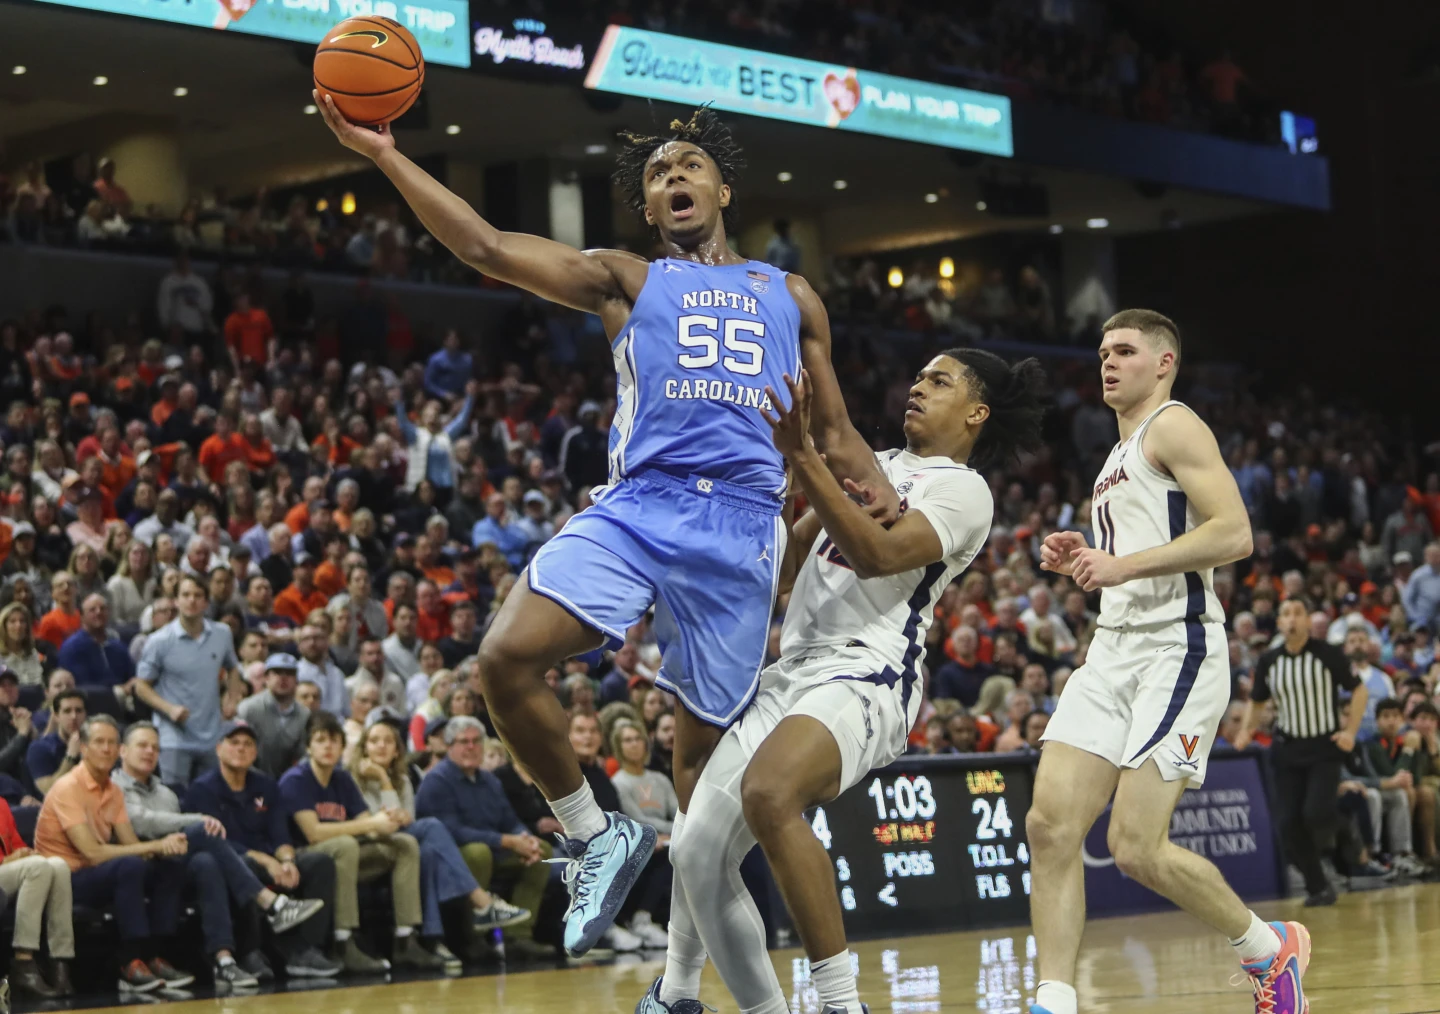 UNC men's basketball in good position to win ACC regular-season title, moves up in NET rankings